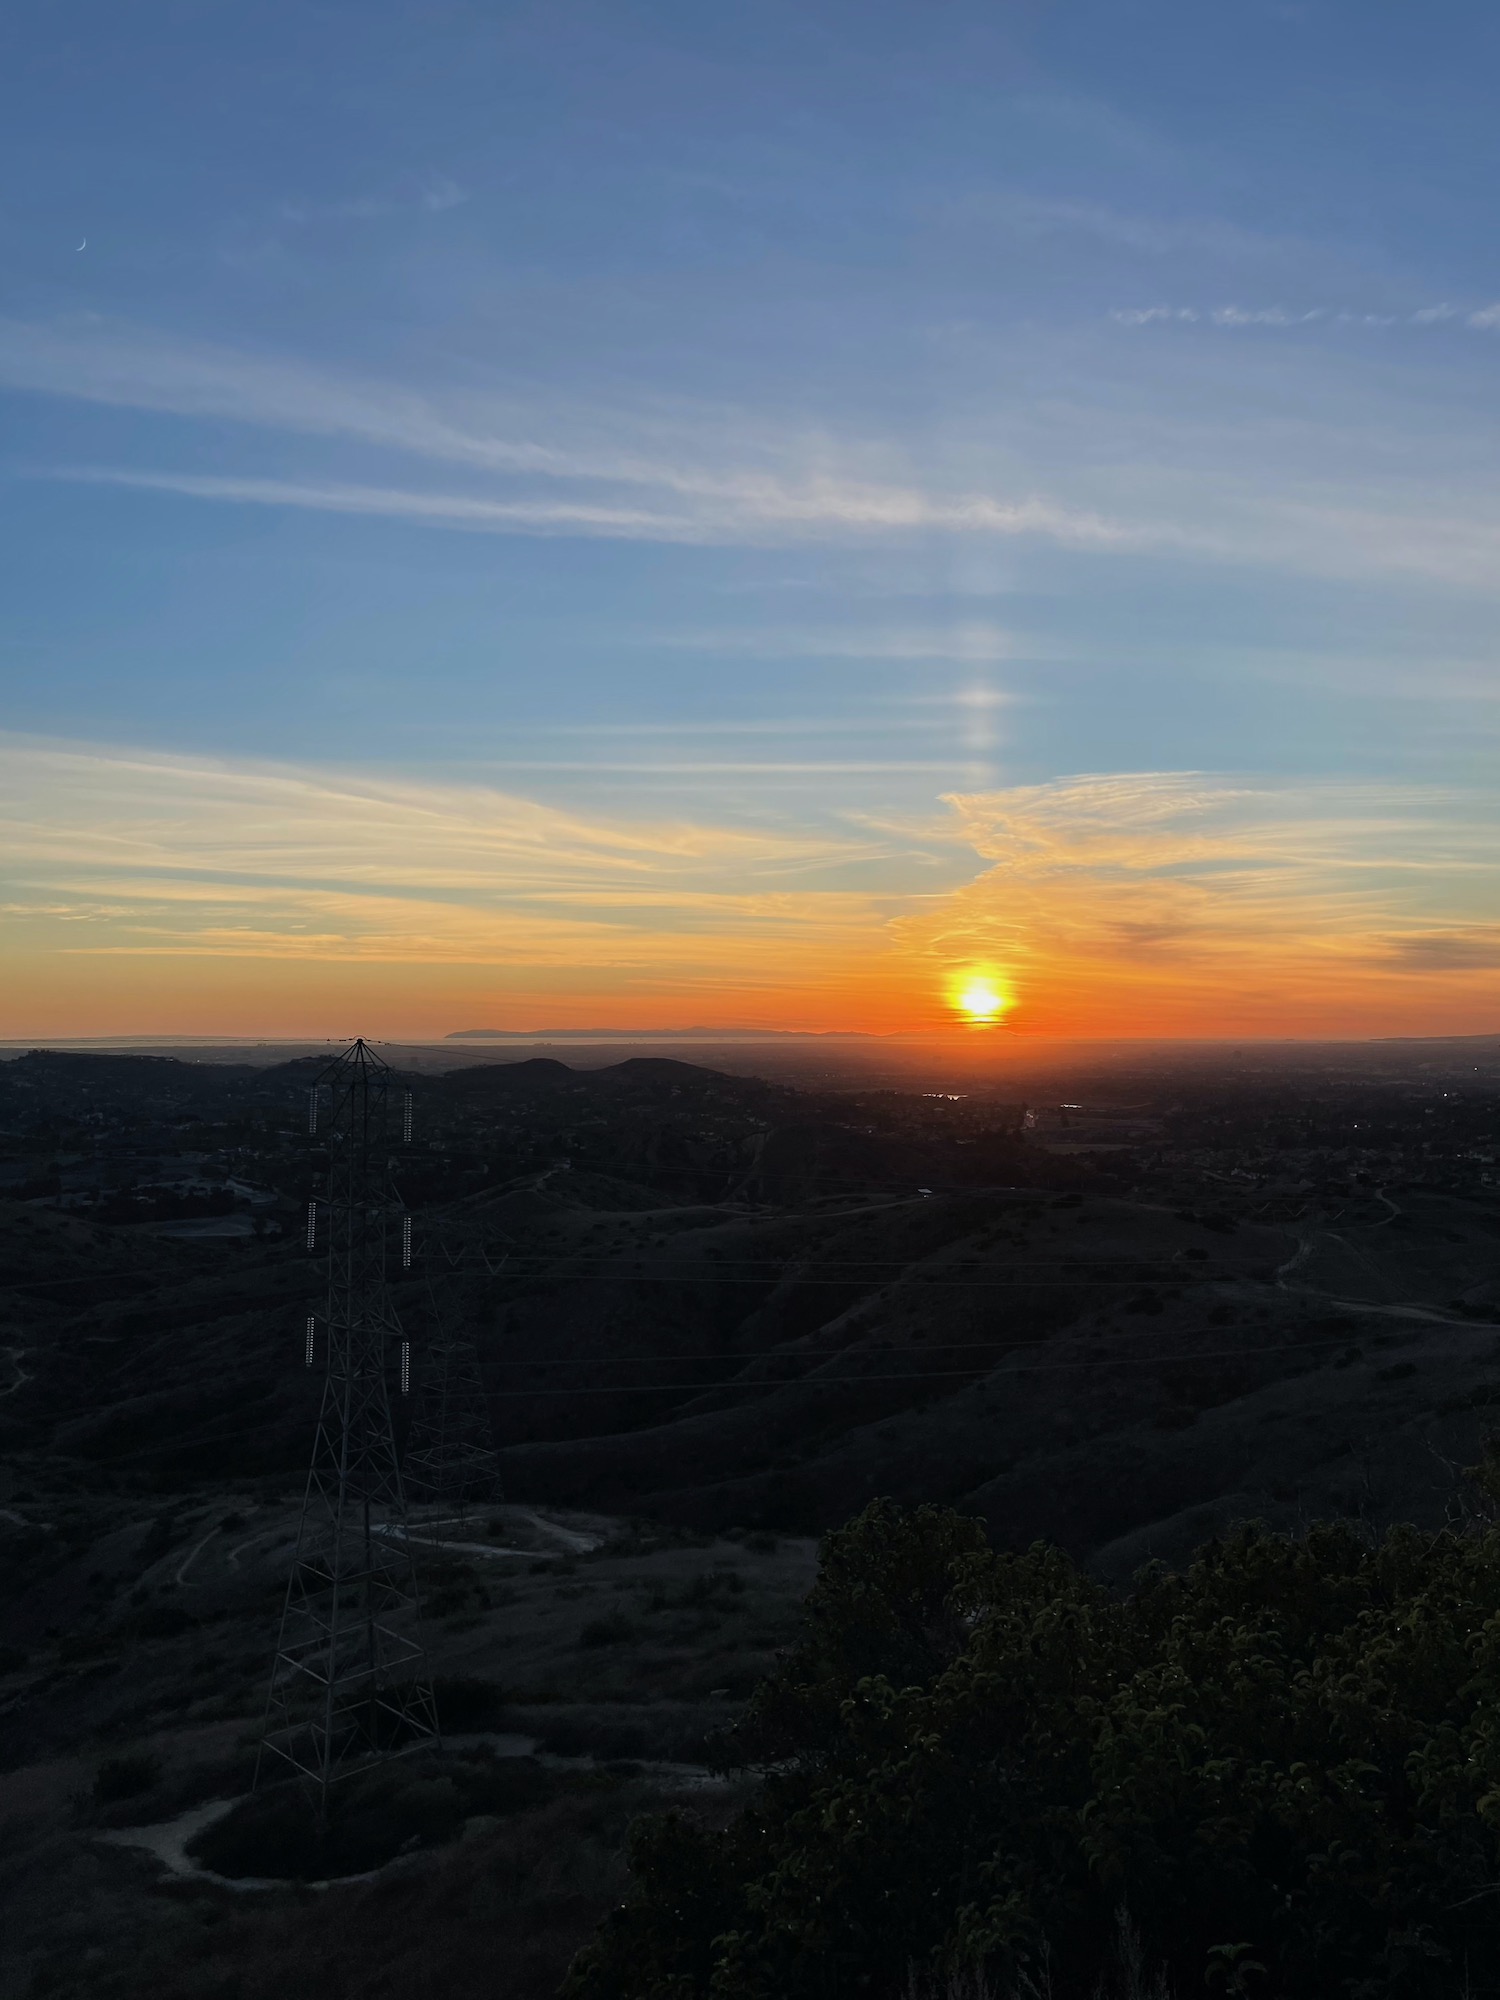 Sunset over pacific ocean - robbers roost vantage point - anaheim hills -16